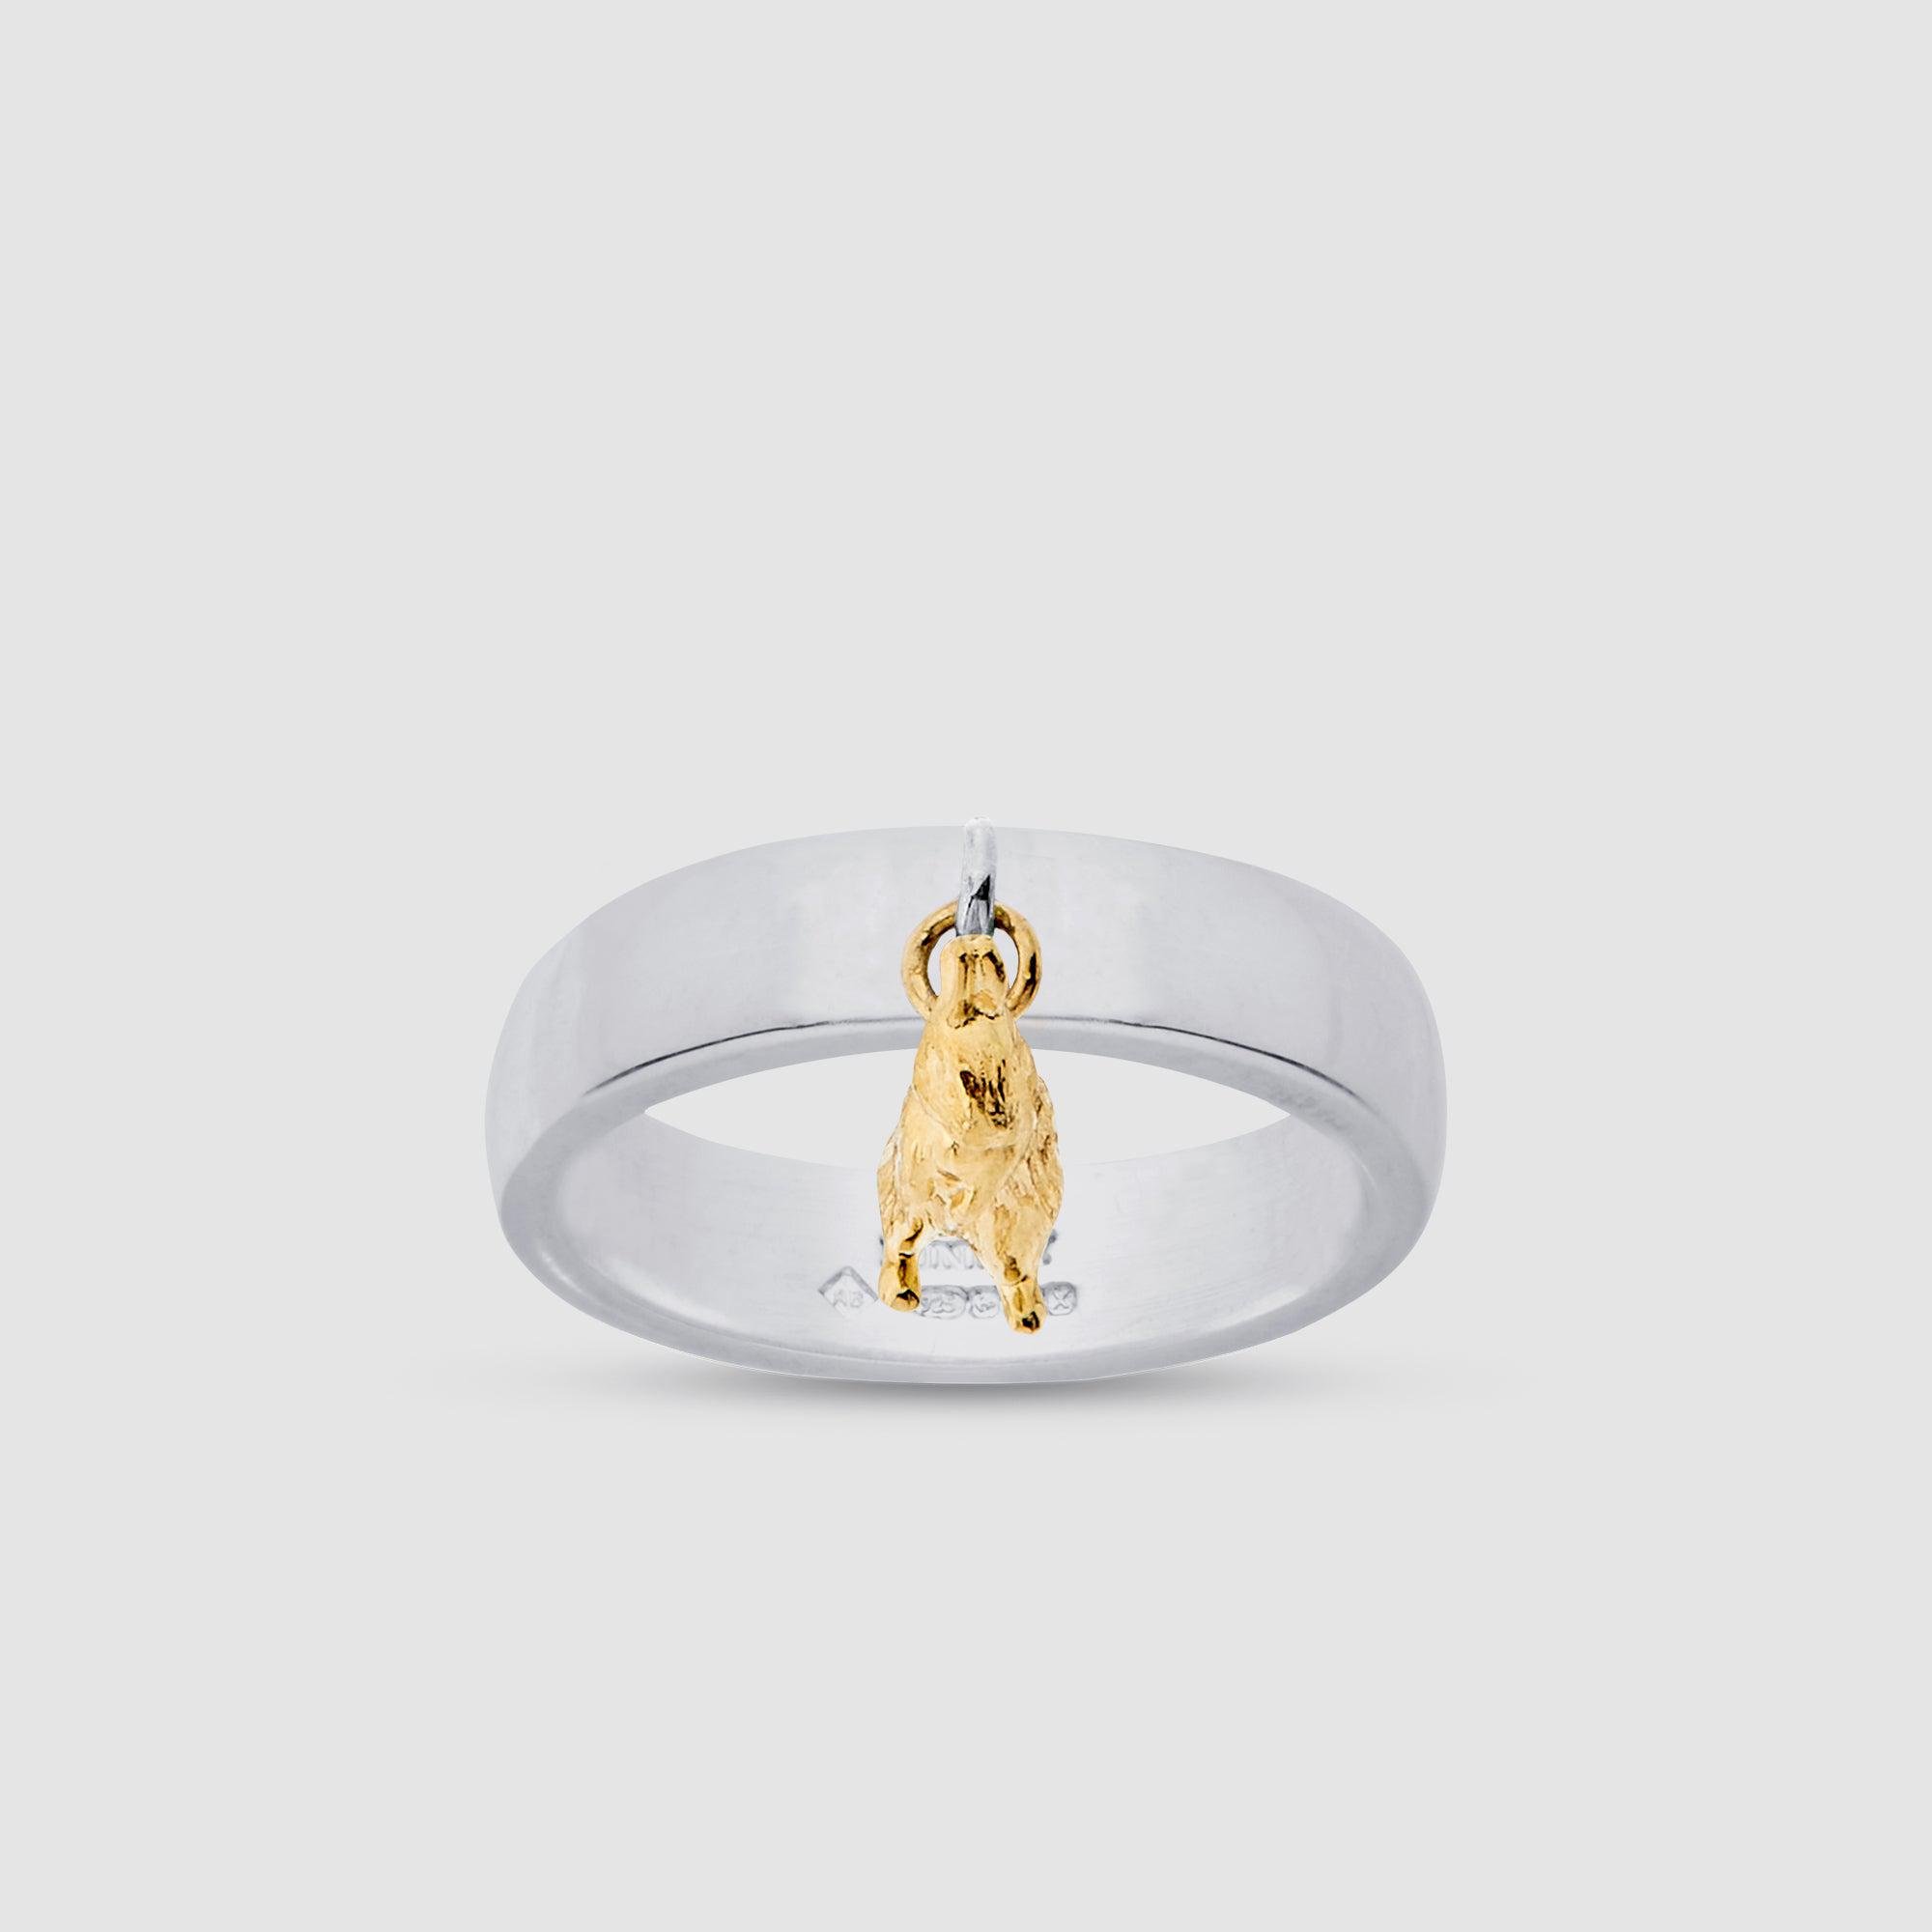 Bunney - Silver Ring with Yellow Gold Rabbit Charm by BUNNEY